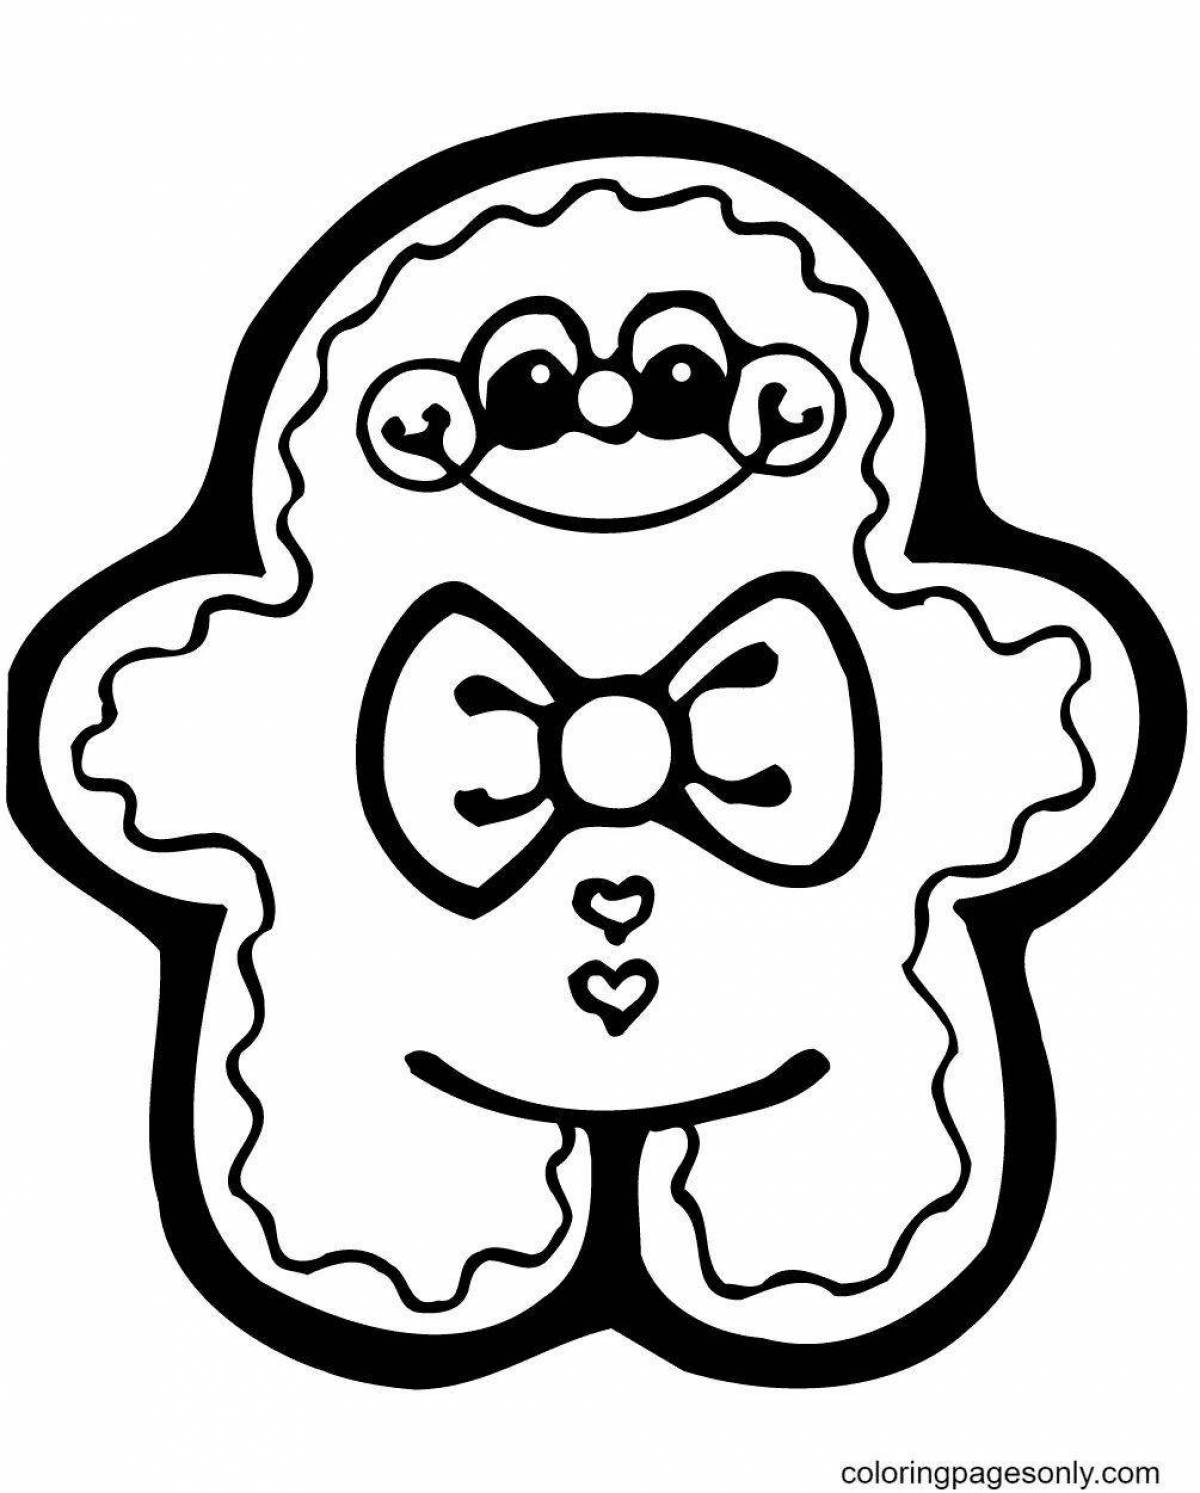 Bright gingerbread coloring pages for kids